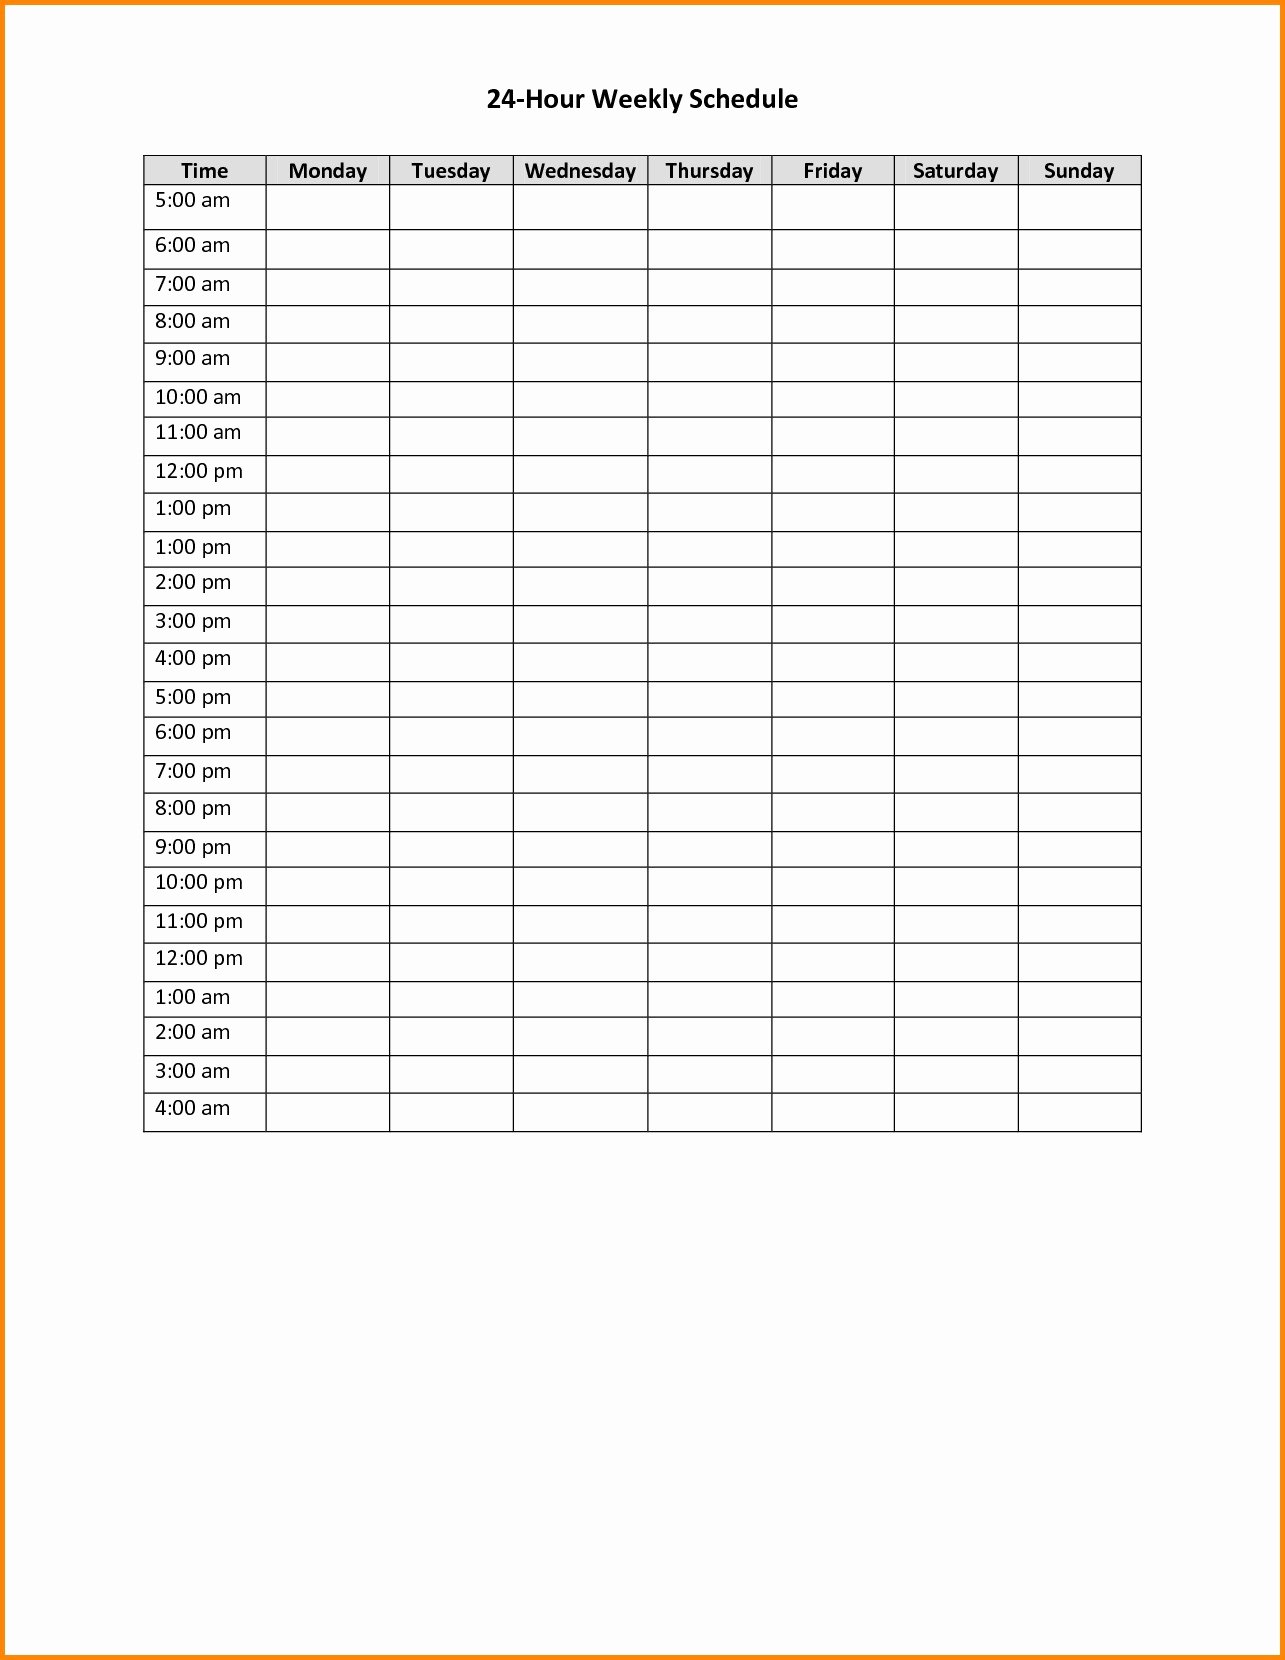 Half Hour Schedule Template Awesome Calendar Blanks Weekly by Half Hour 2018 Calendar Template